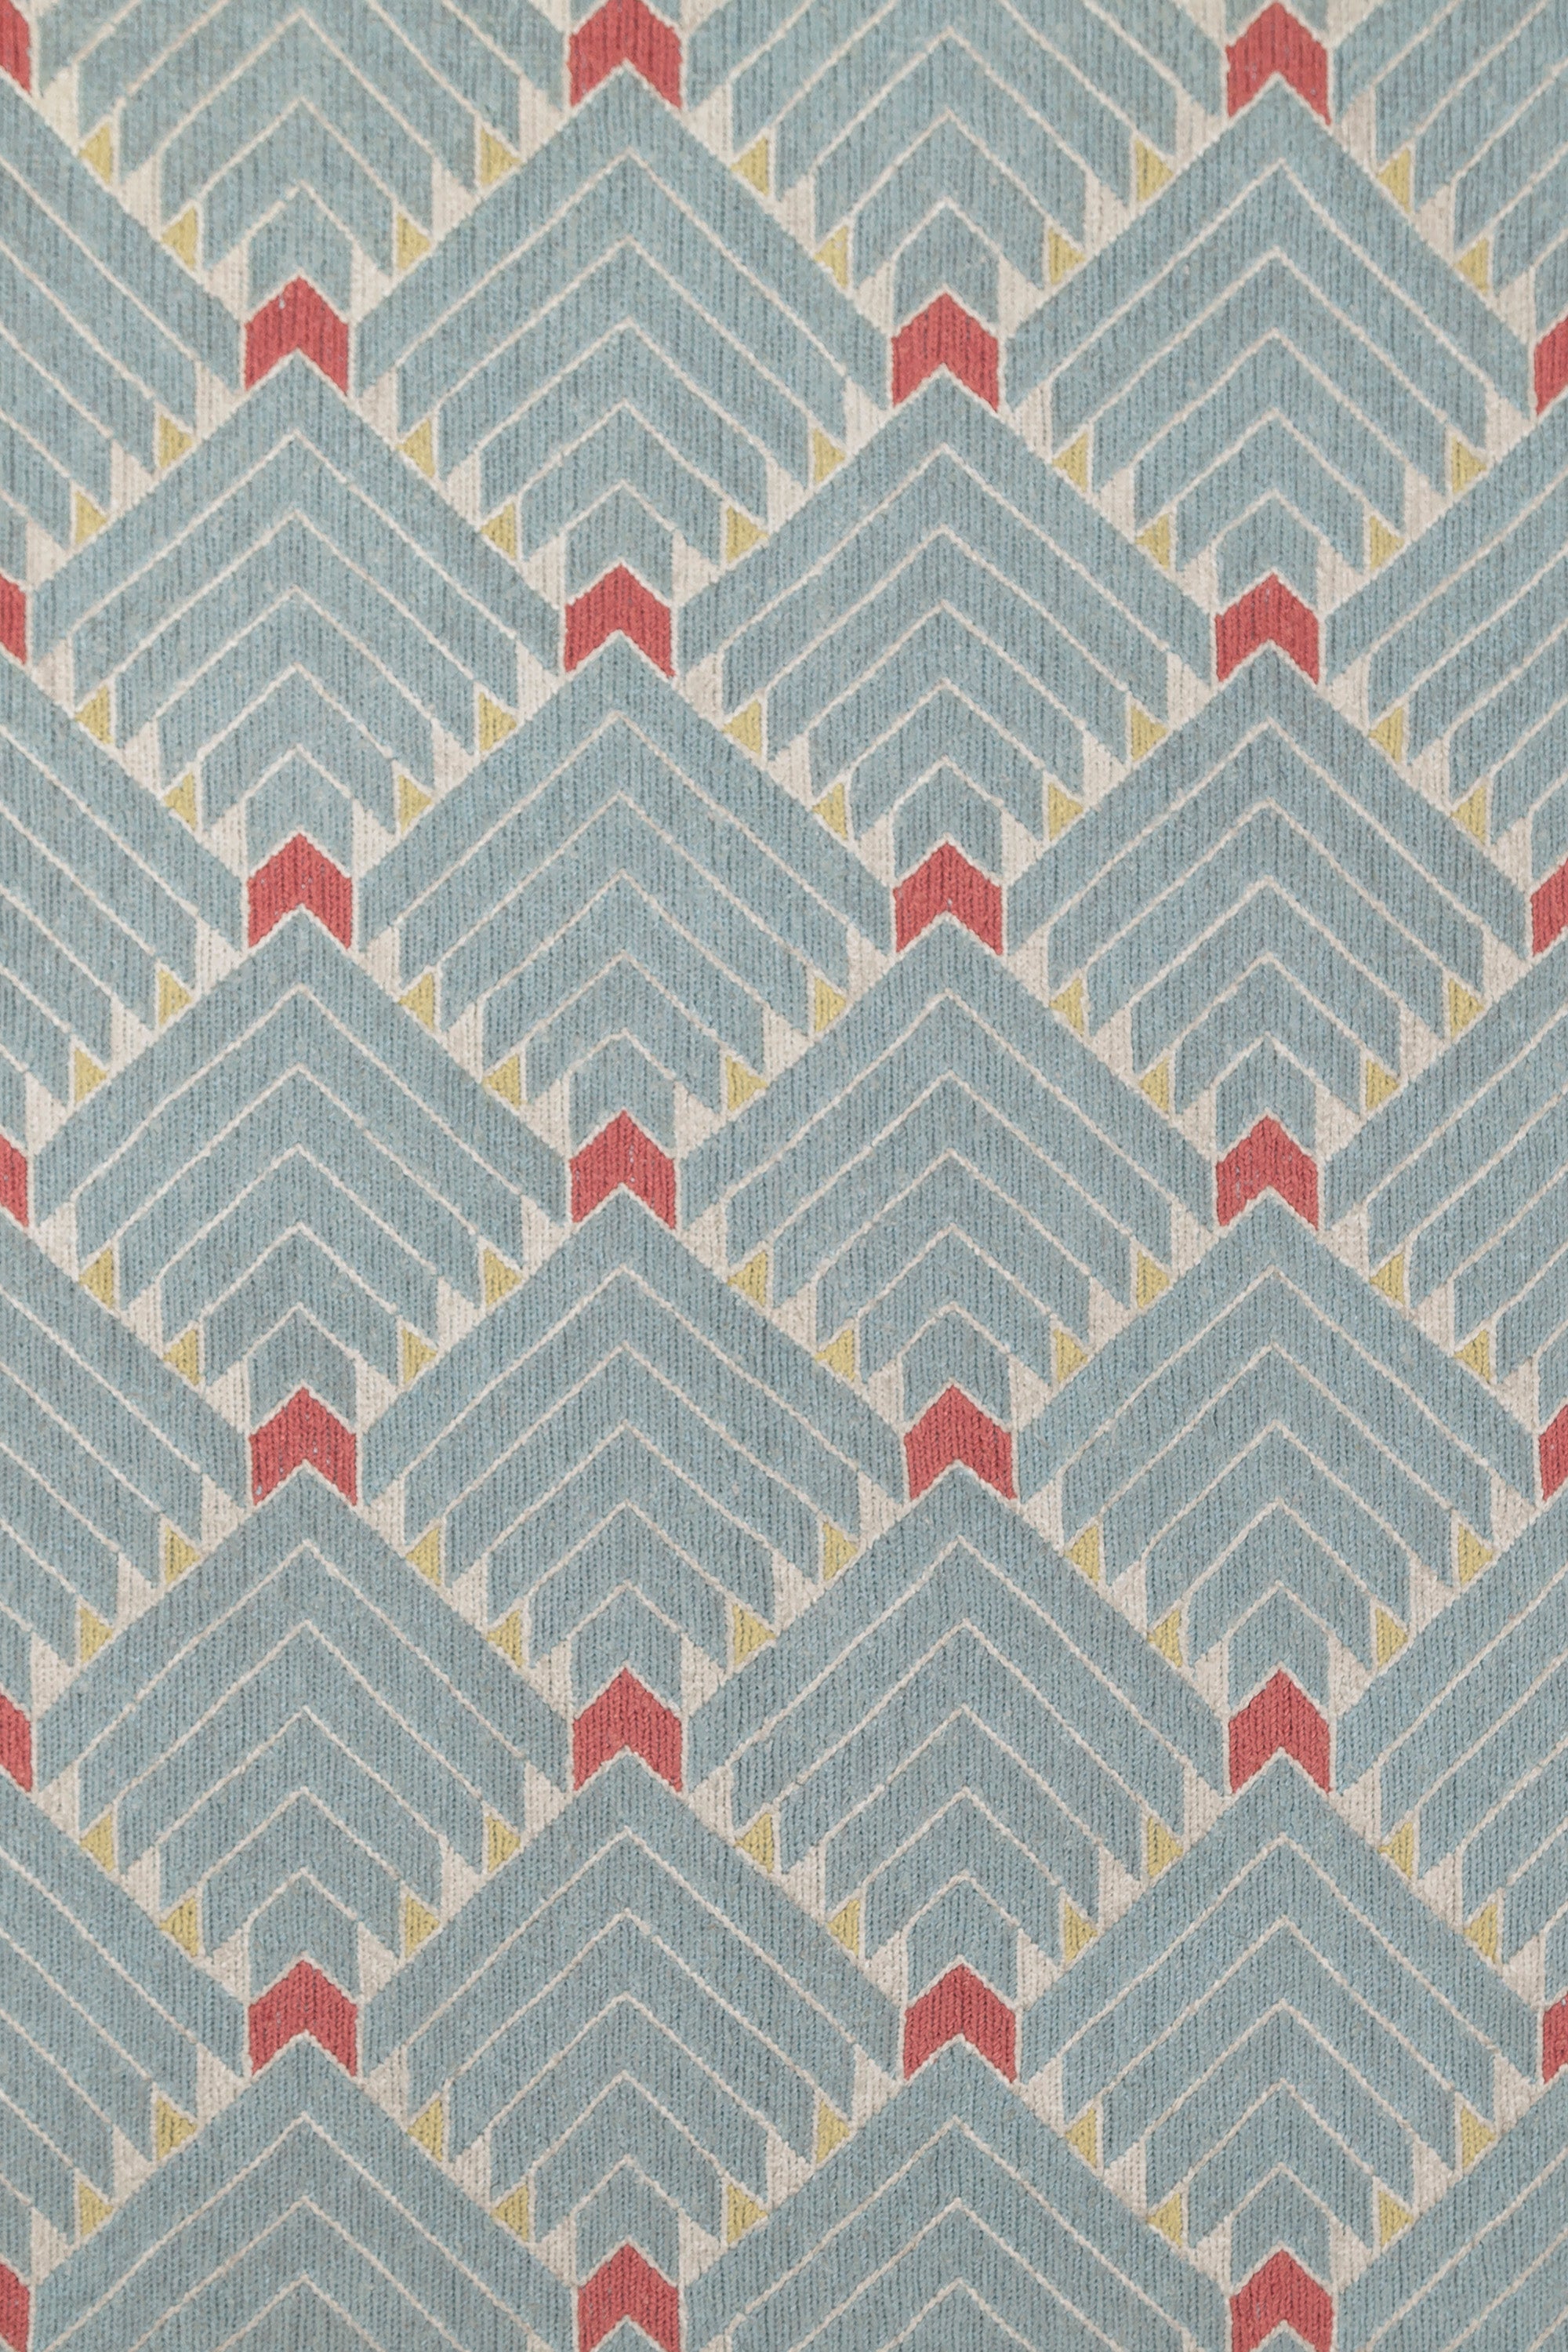 The Arrow Rug in Powder Blue-Coral features a dense pattern of nesting arrow shapes in soft blue with accents of coral and yellow on an ivory field. 